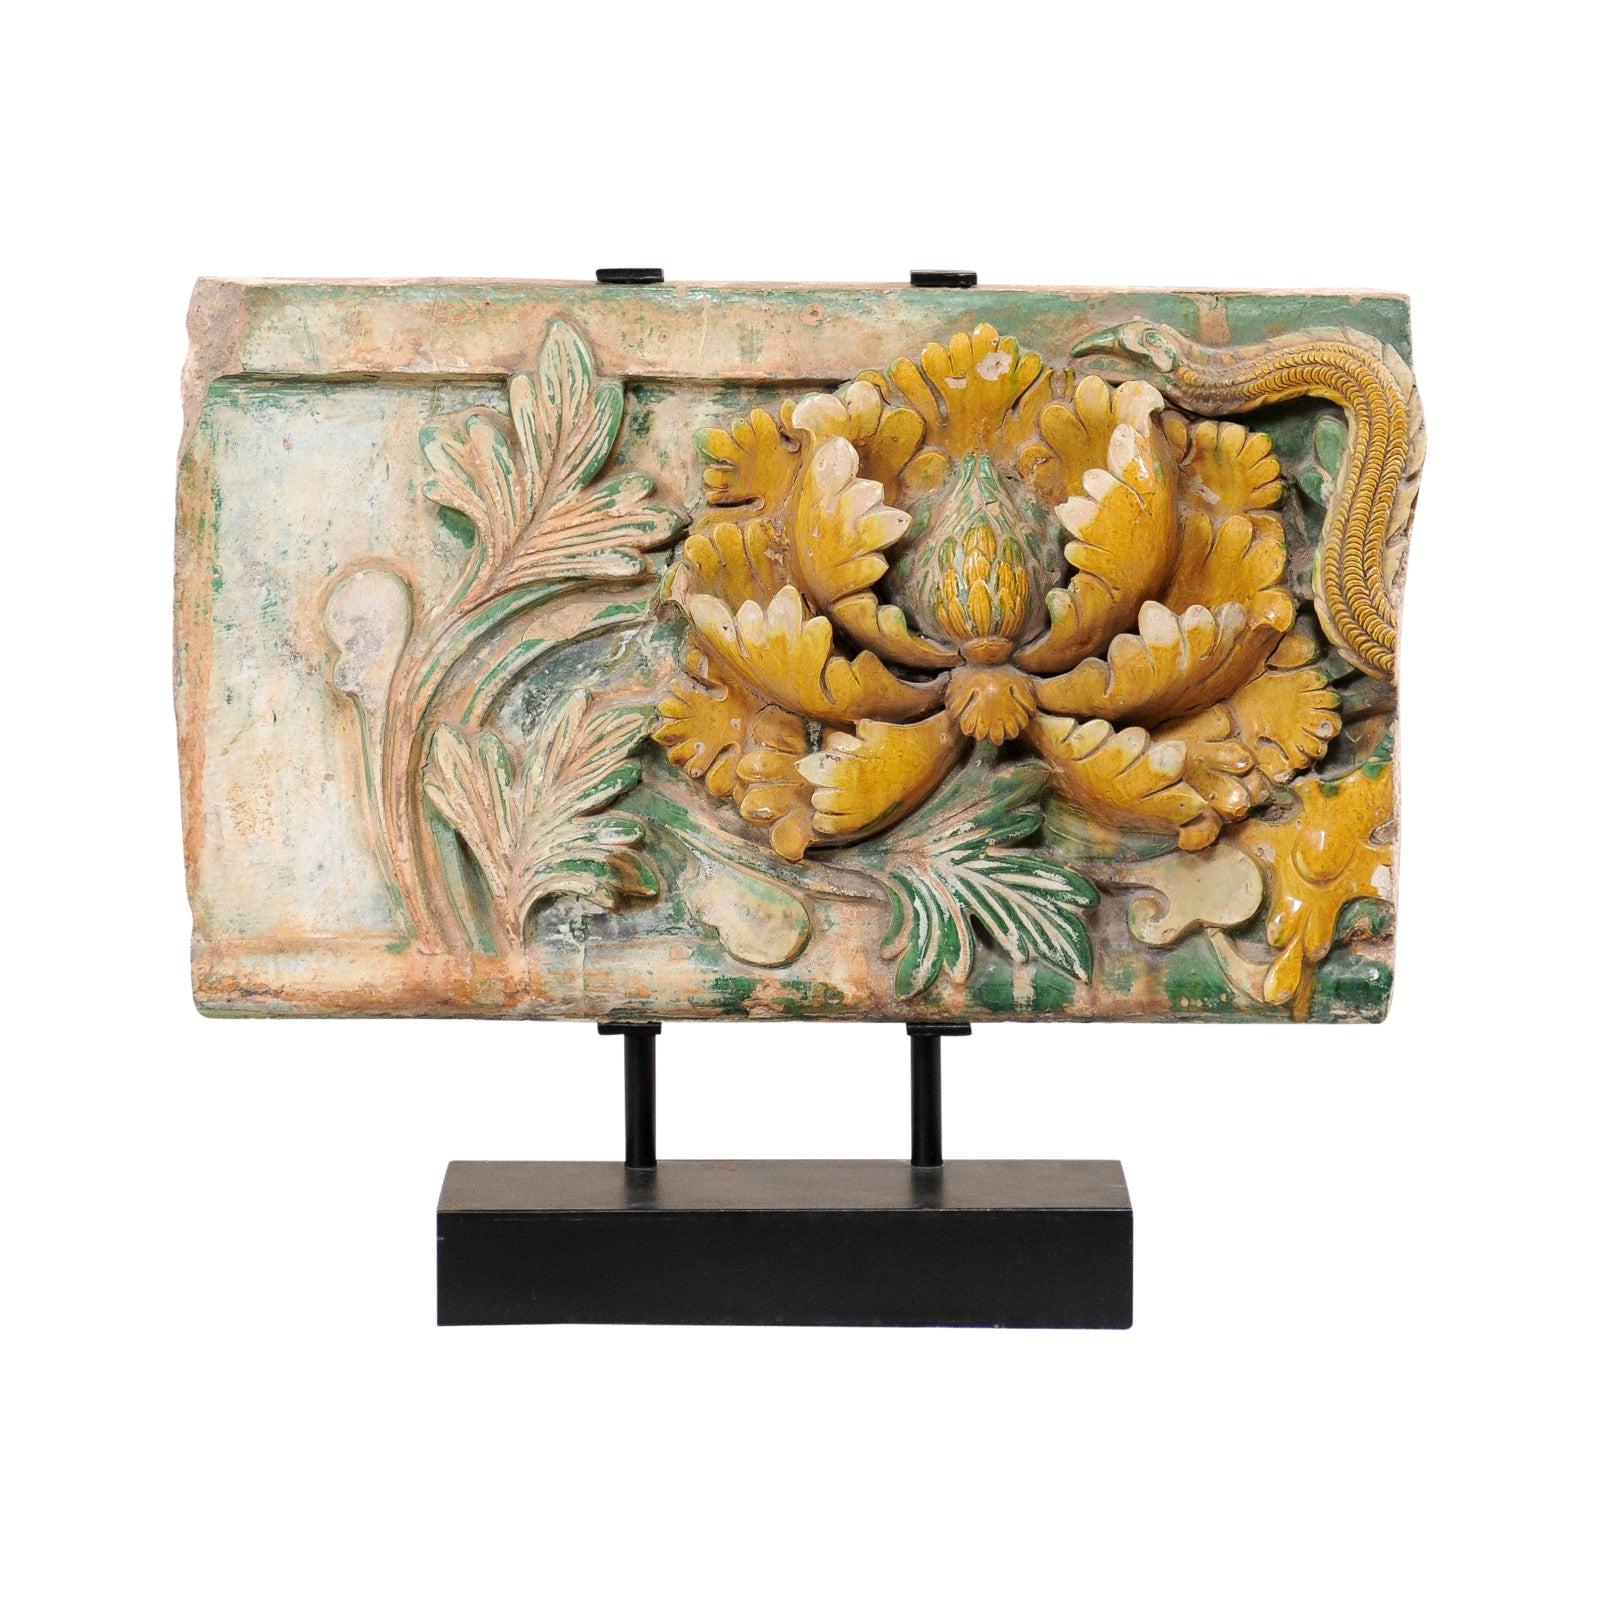 Chinese Glazed Terracotta Temple Fragment '19th C or Older' on Custom Iron Stand